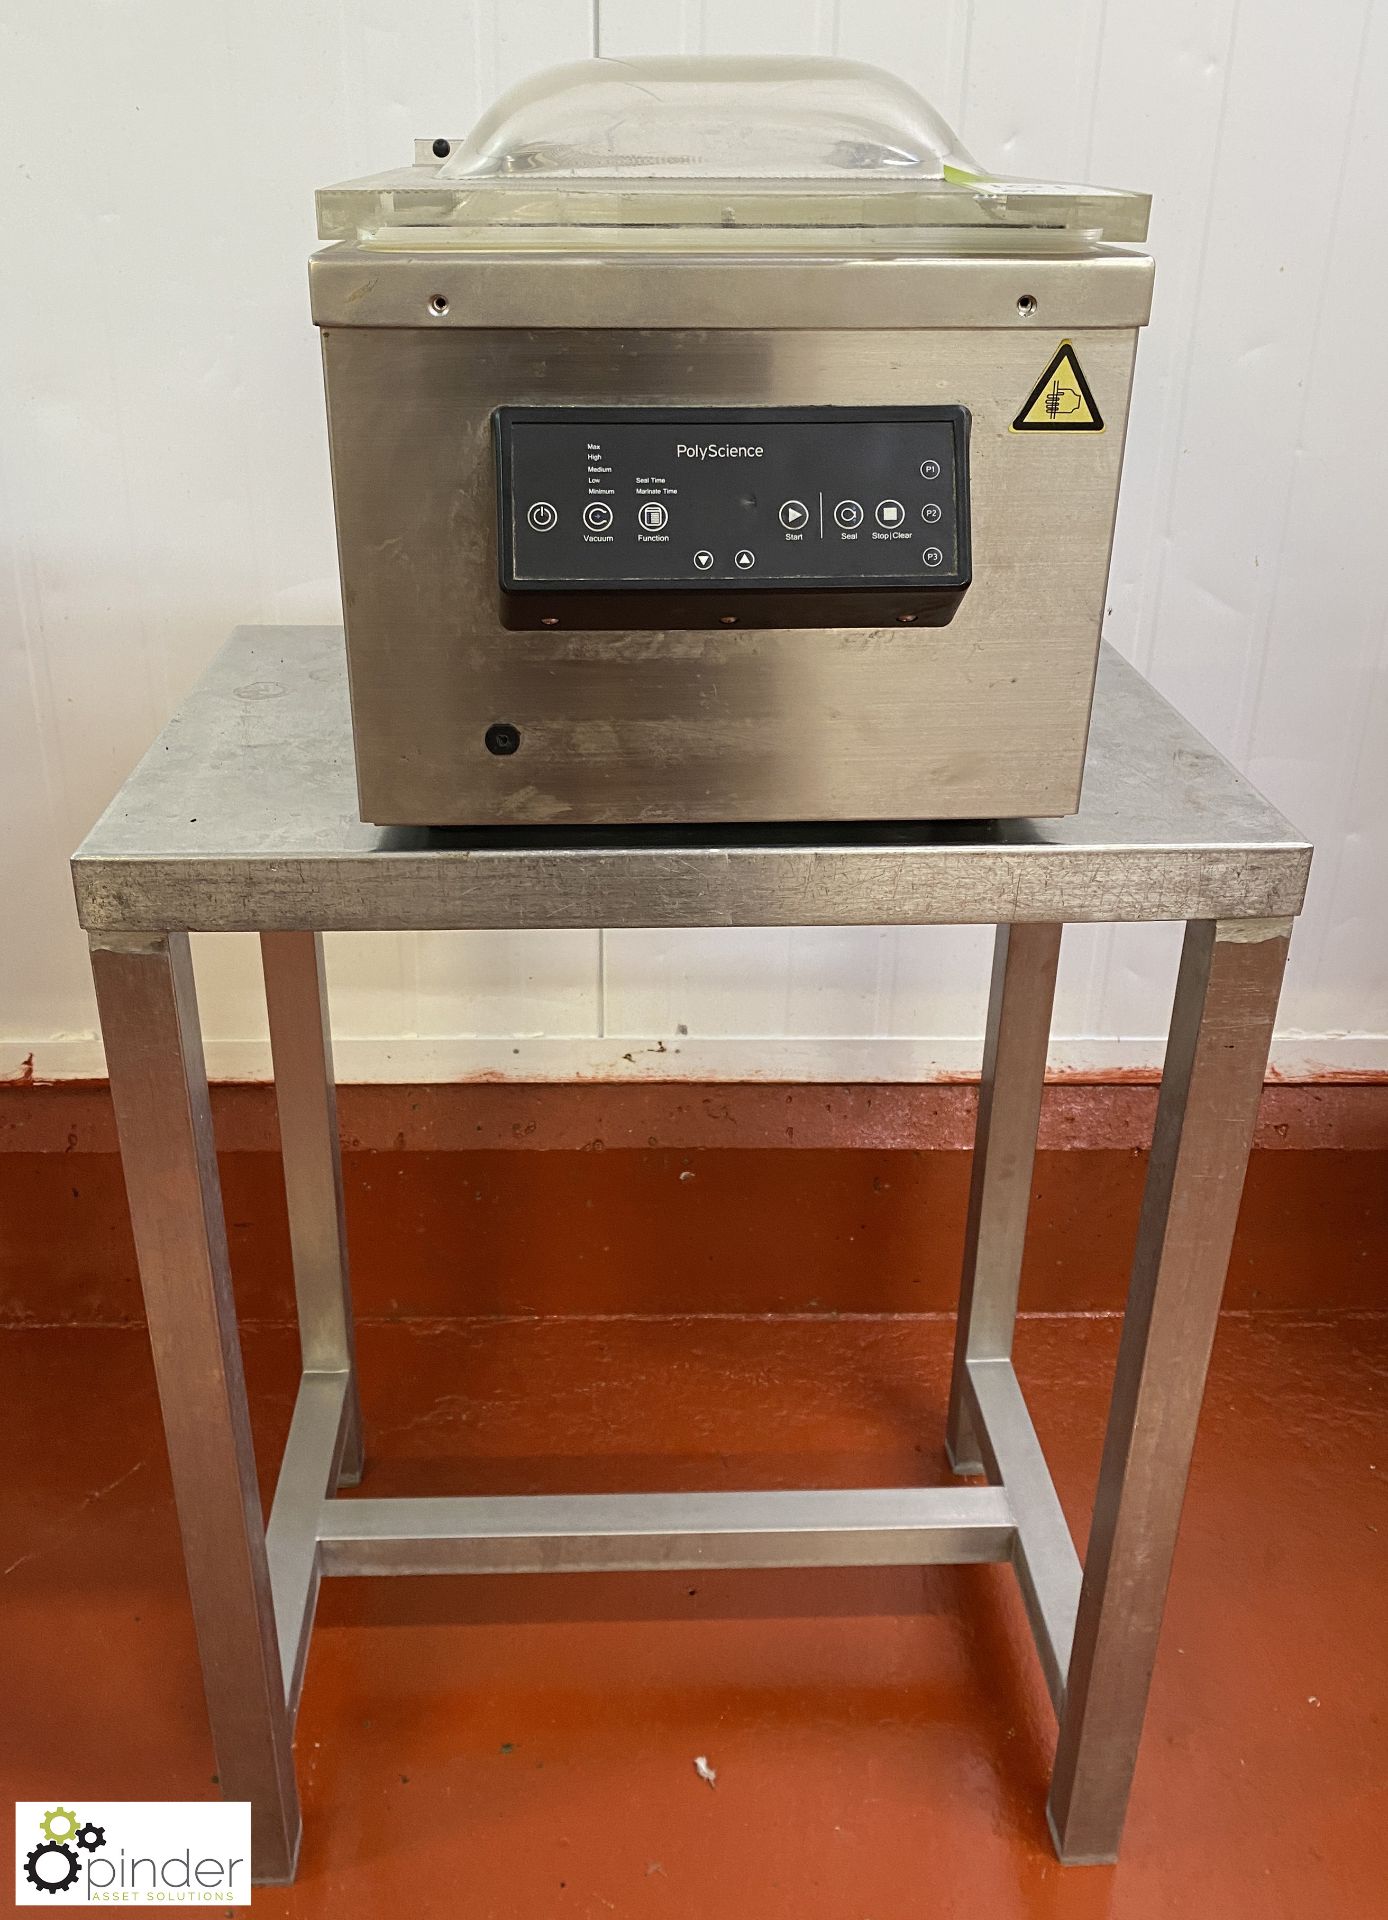 Polyscience M-USCH-300 AC2E Vacuum Packer, 240volts, with stainless steel stand (Lift Out Fee: £30 - Image 2 of 5